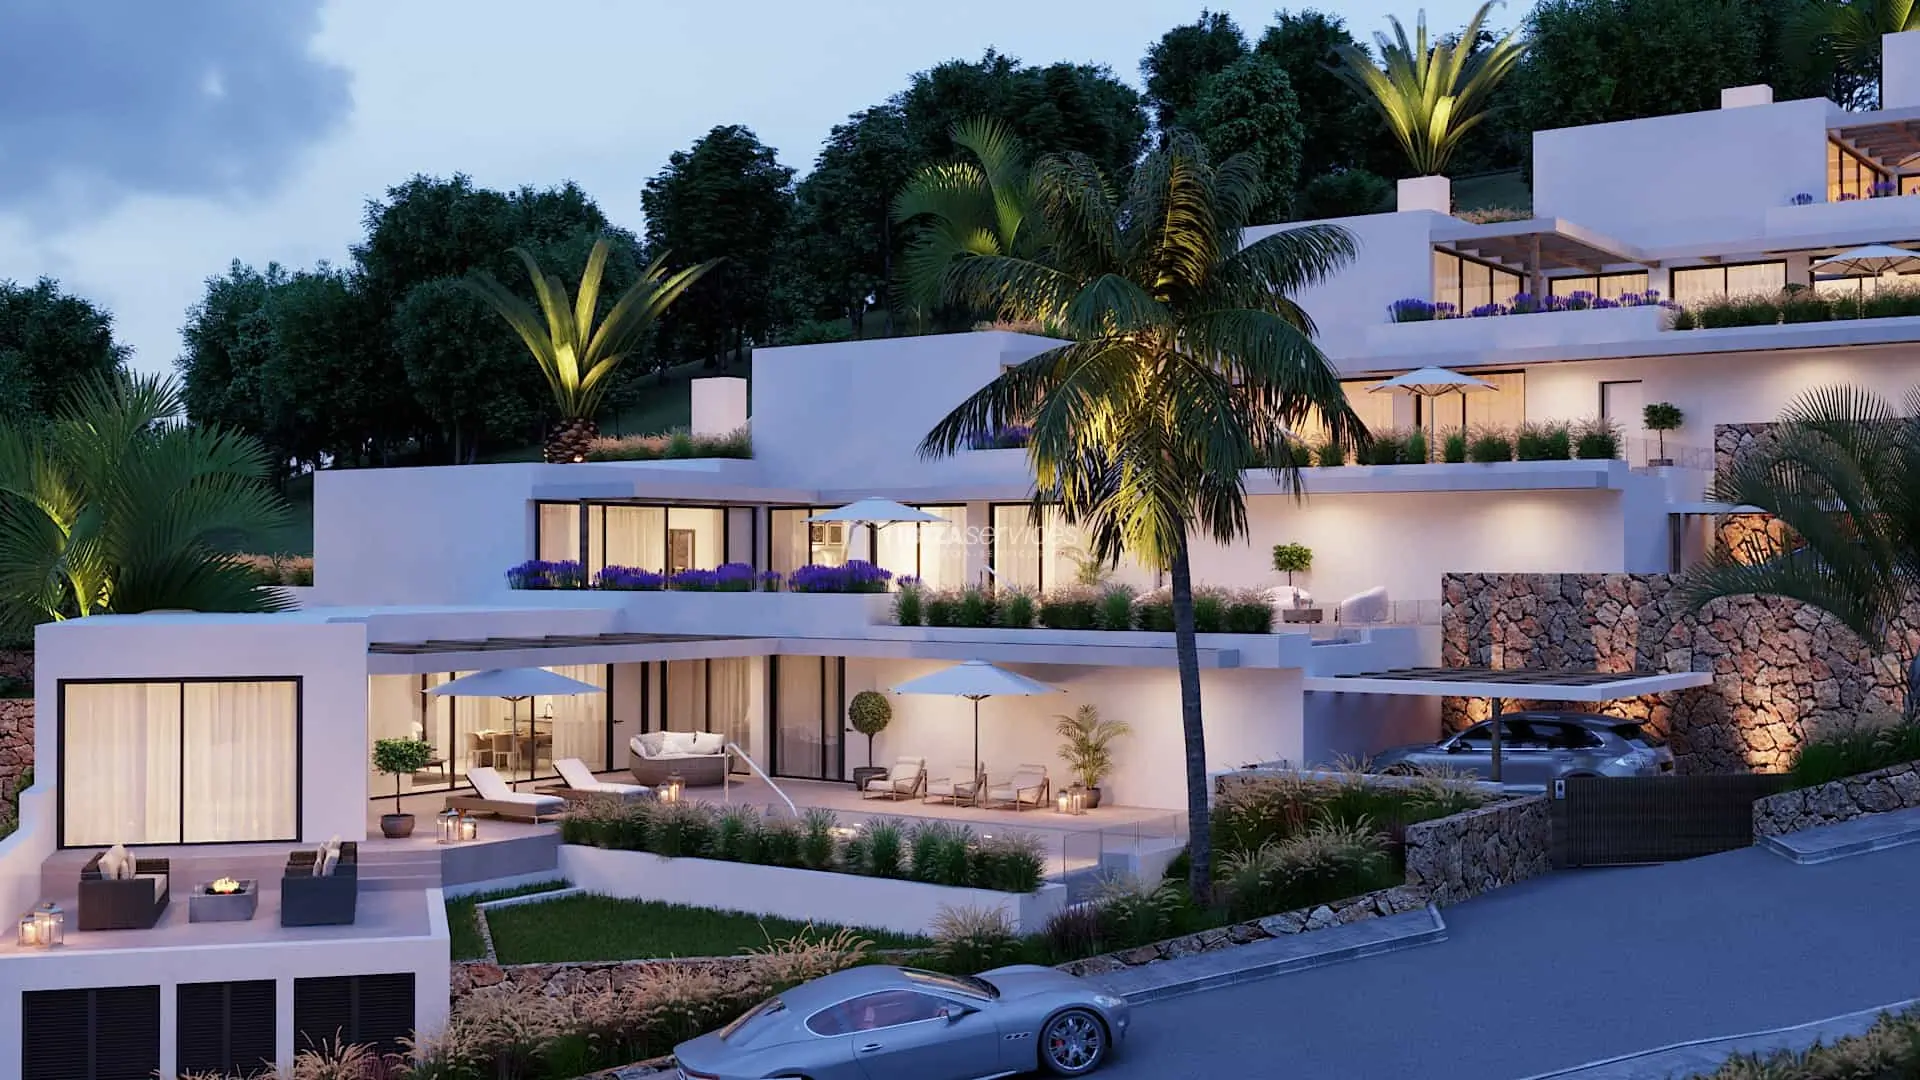 7 Luxury Detached Villas With Private Pools & Sunset Views